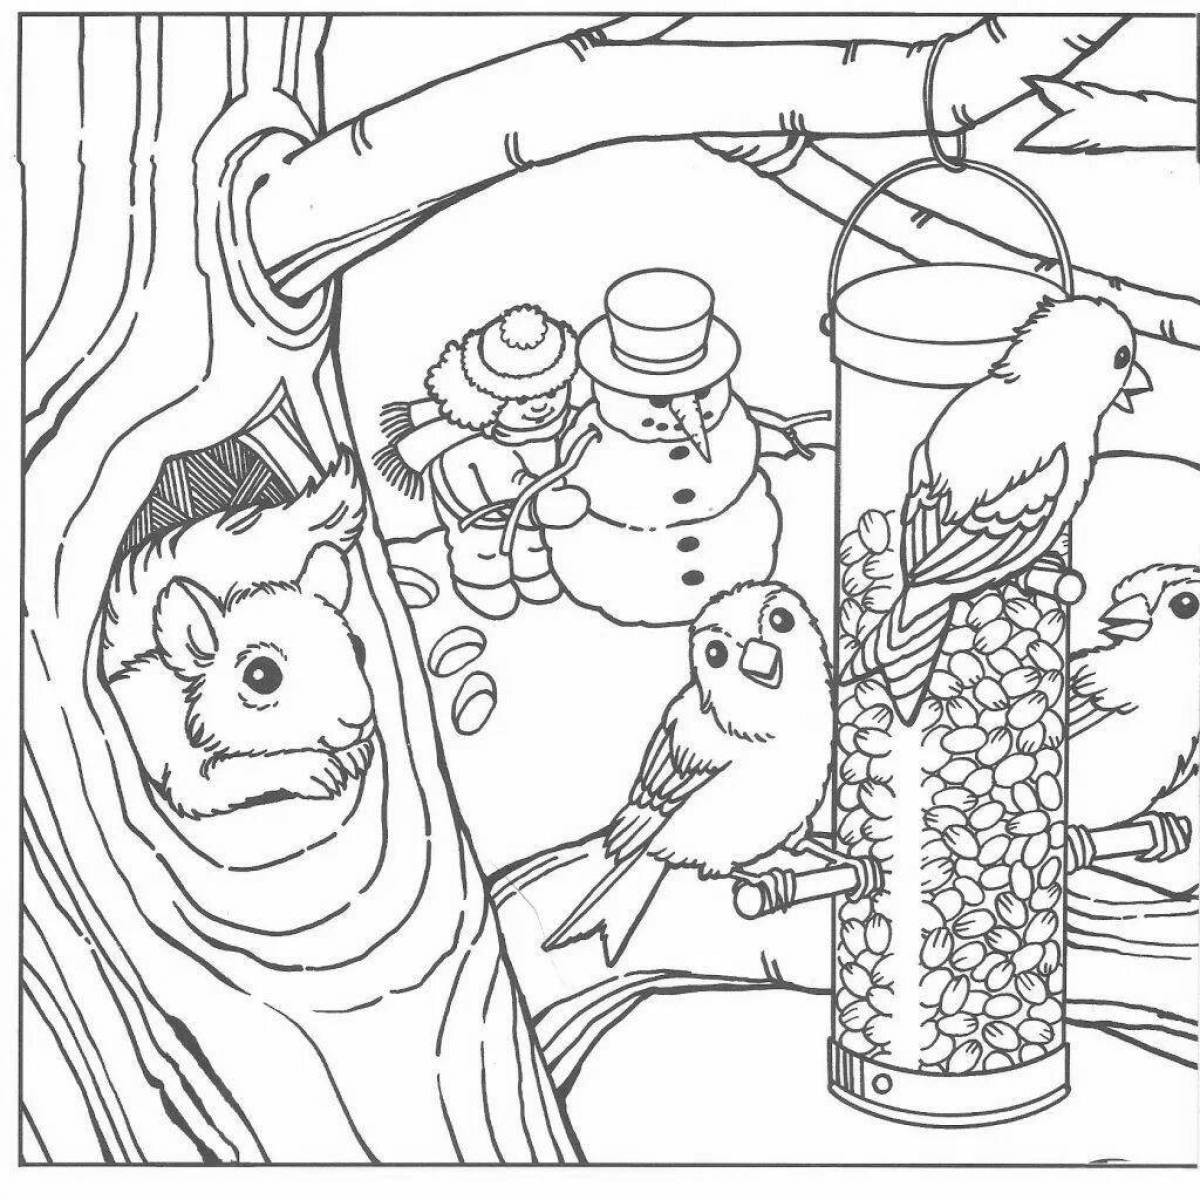 Amazing coloring book: how to help birds in winter